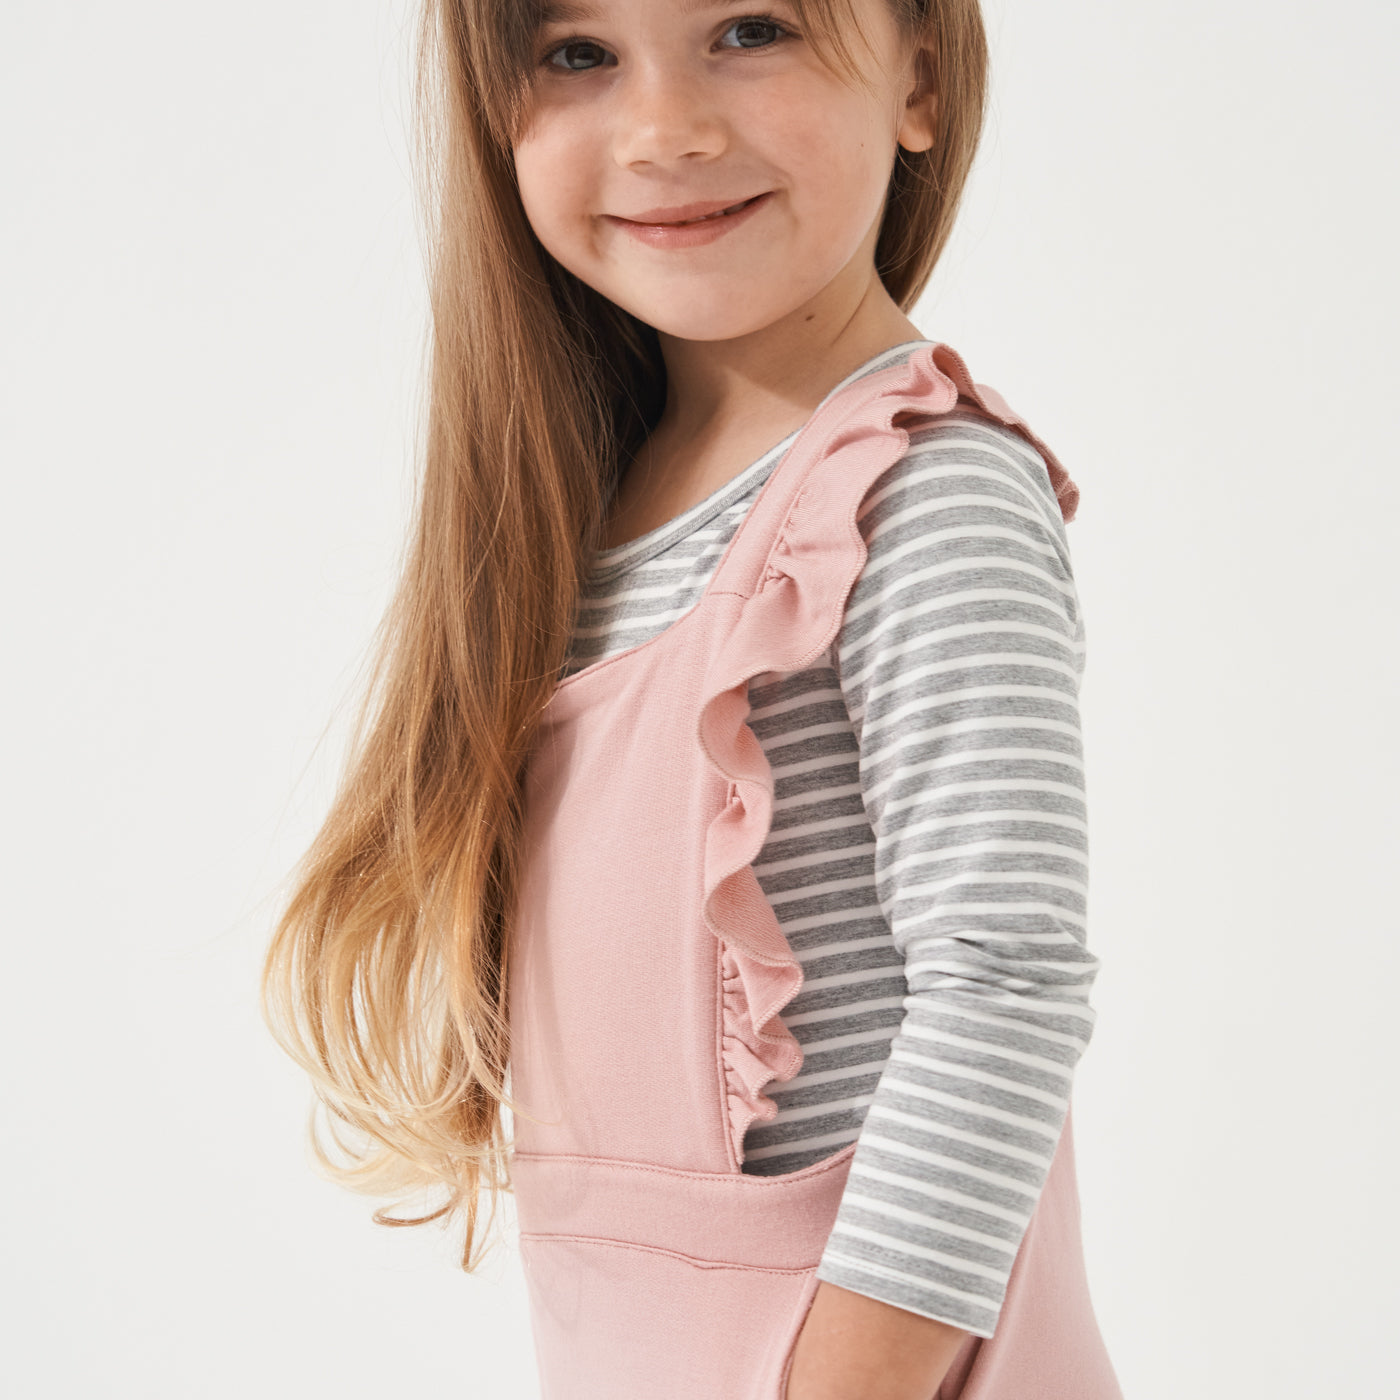 close up profile image of a child wearing Mauve Blush overalls over a Heather Gray Striped classic tee